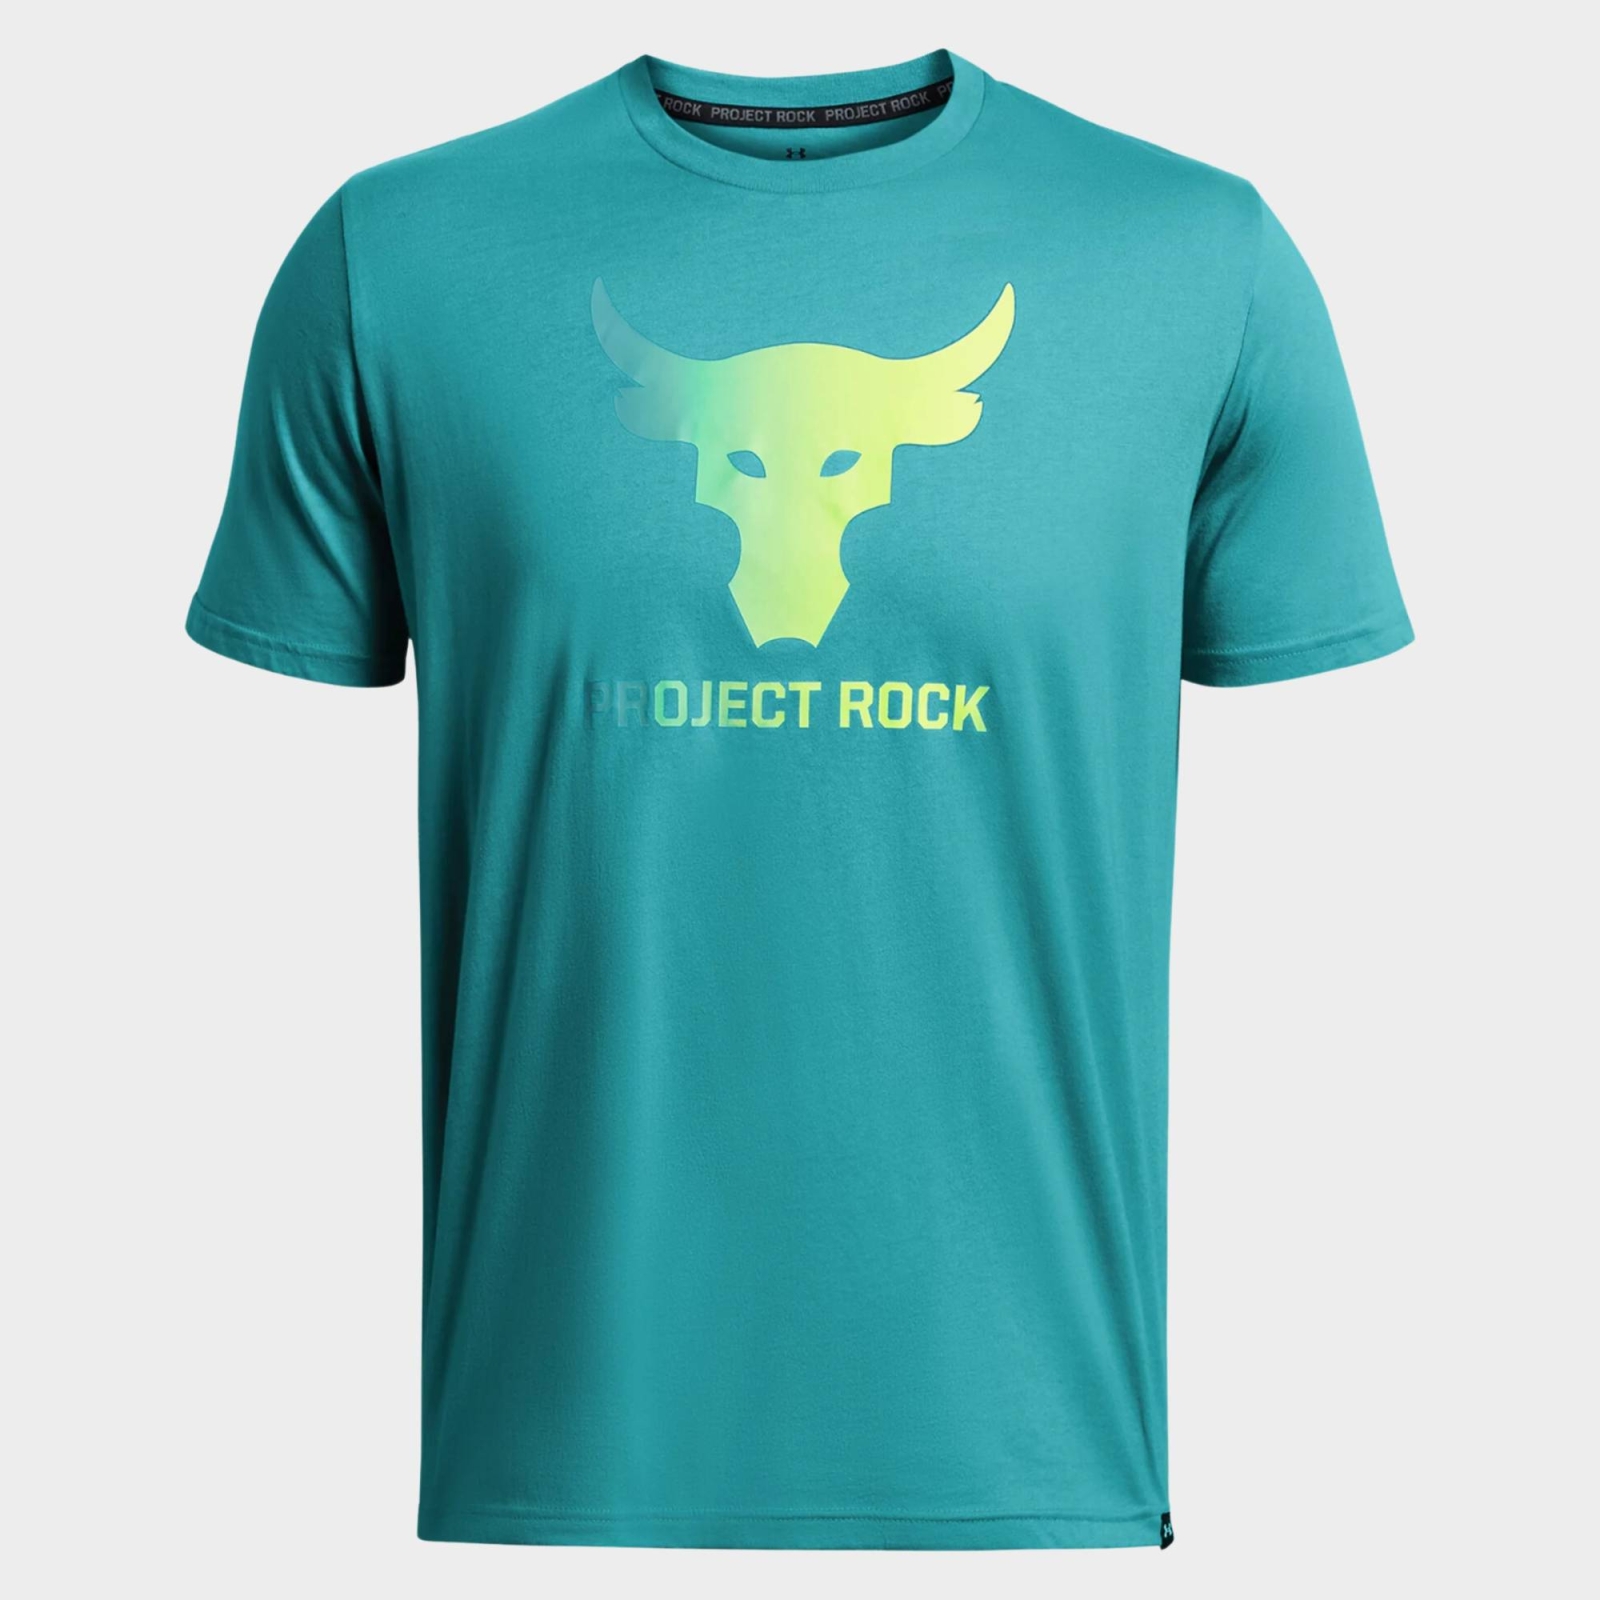 UNDER ARMOUR PROJECT ROCK PAYOFF GRAPHC